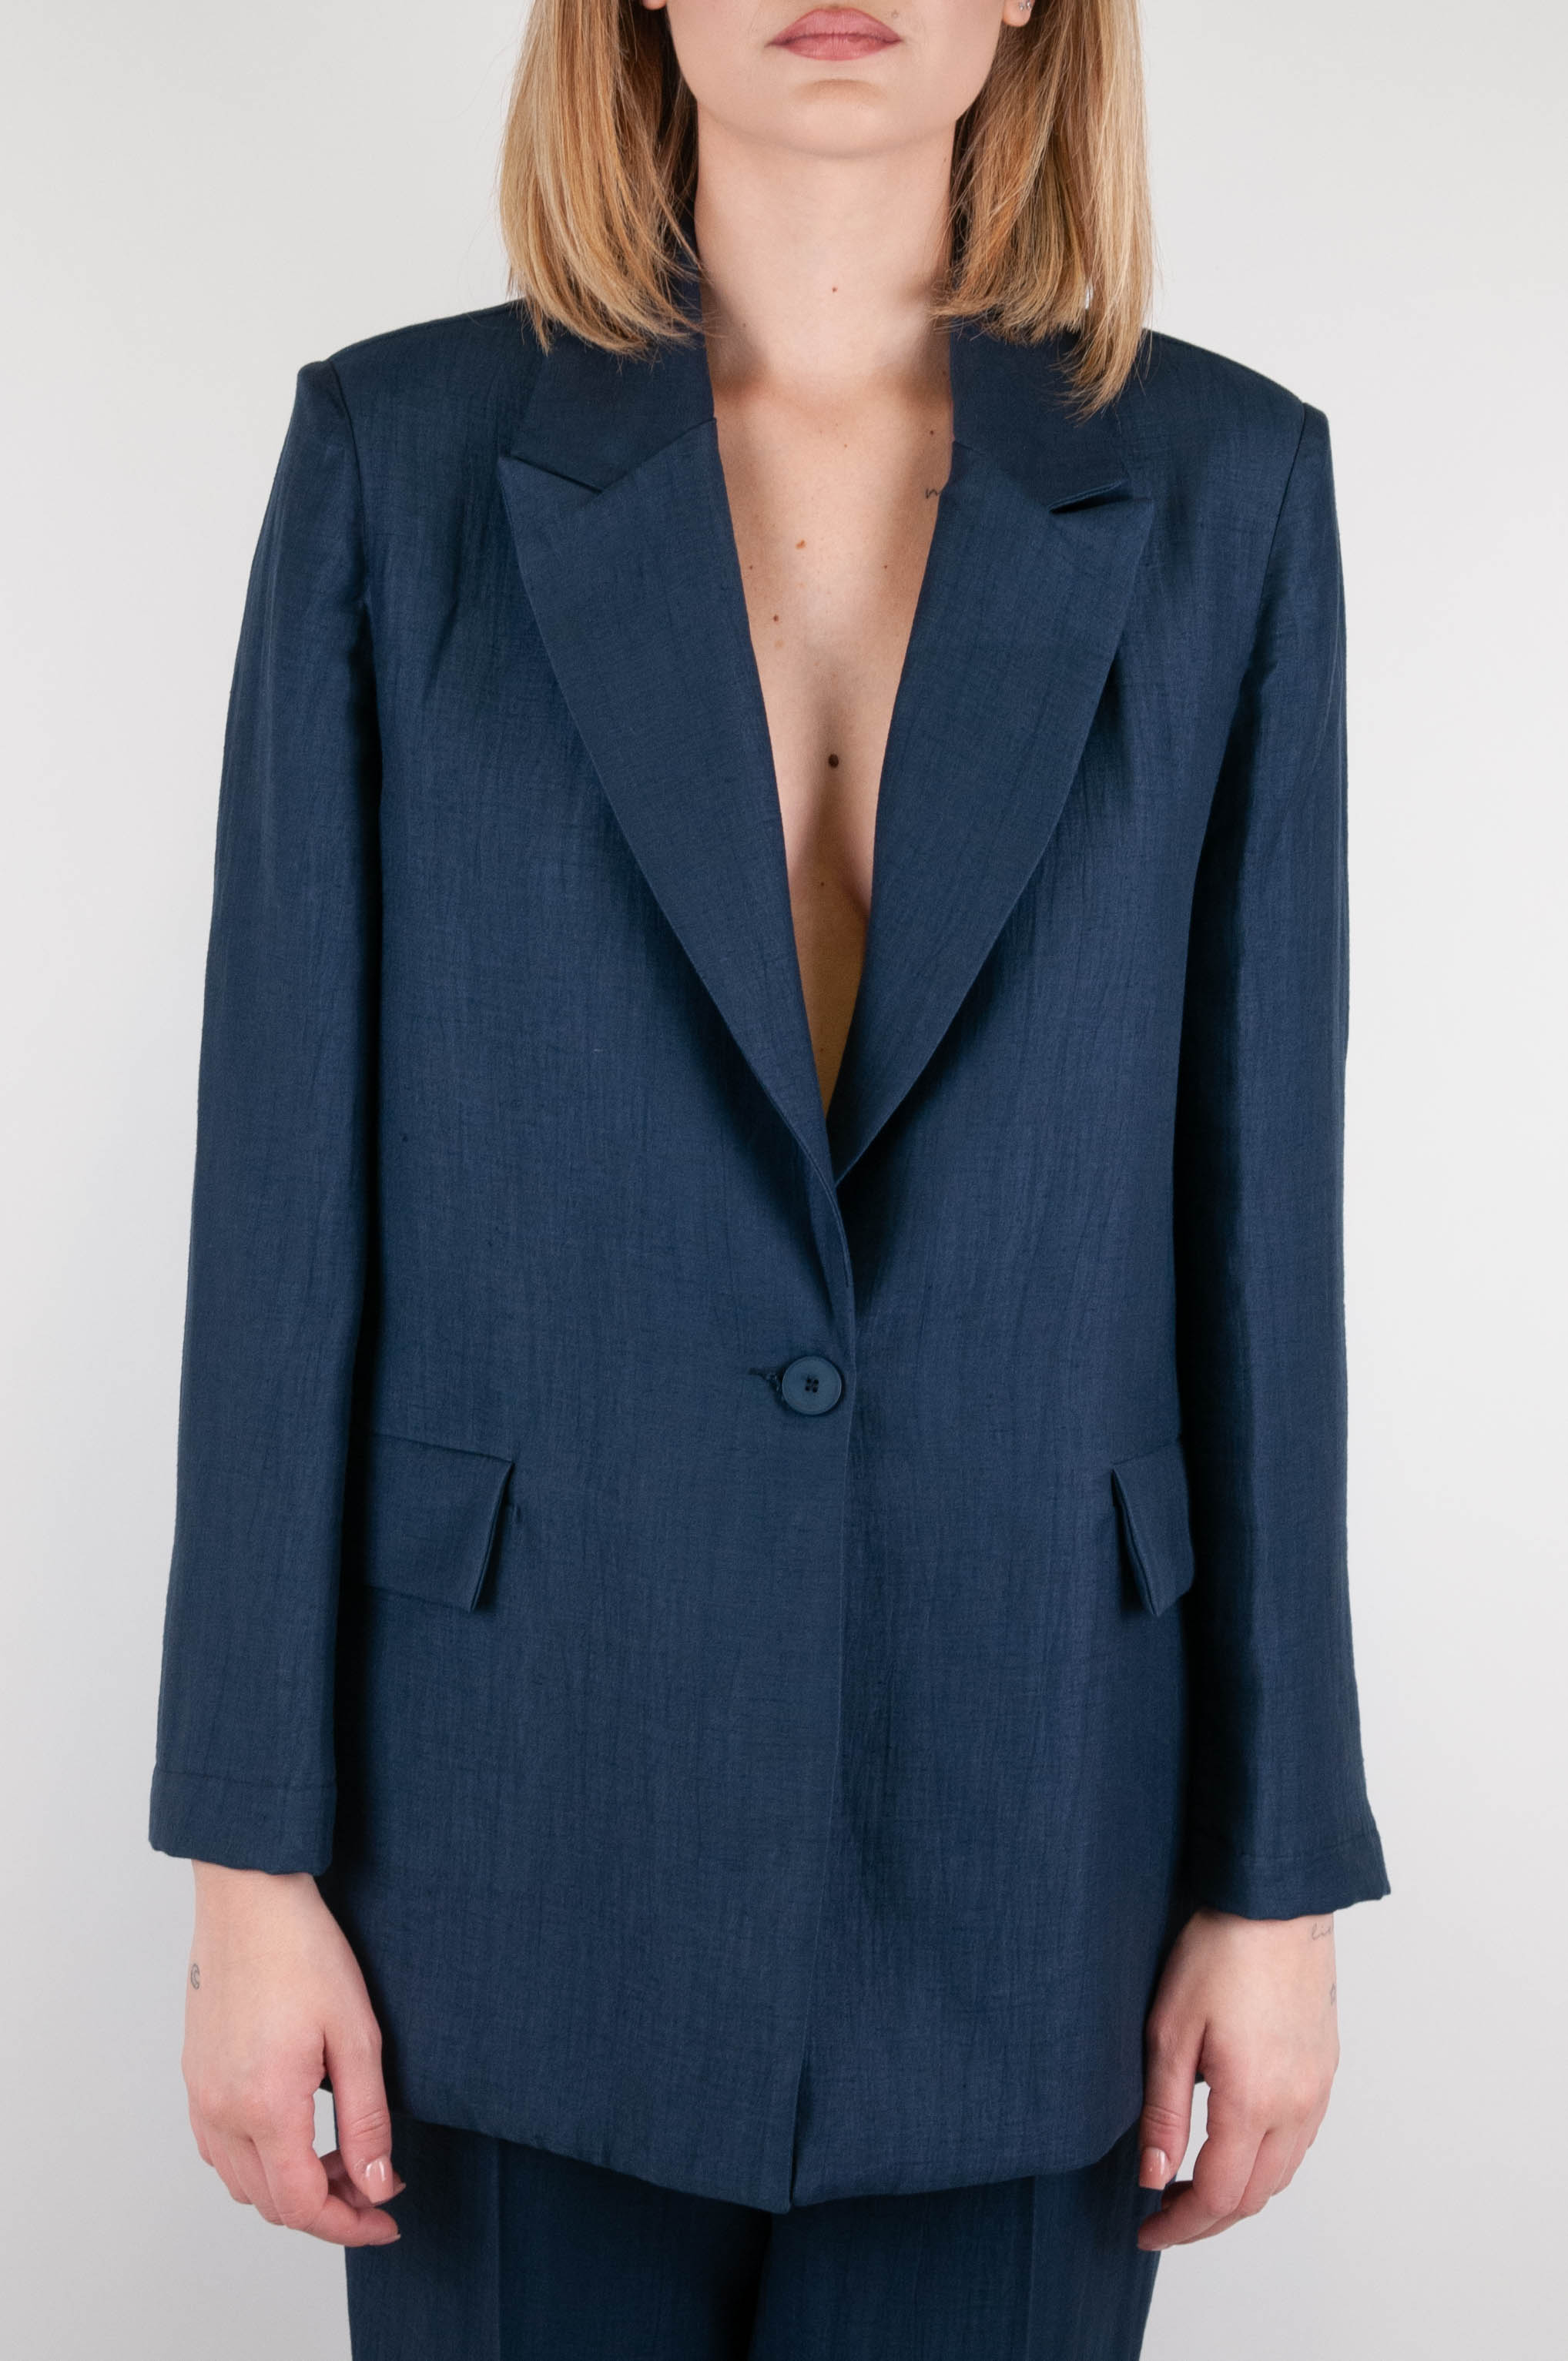 Dixie - Single-breasted linen blend jacket with wide peak lapel